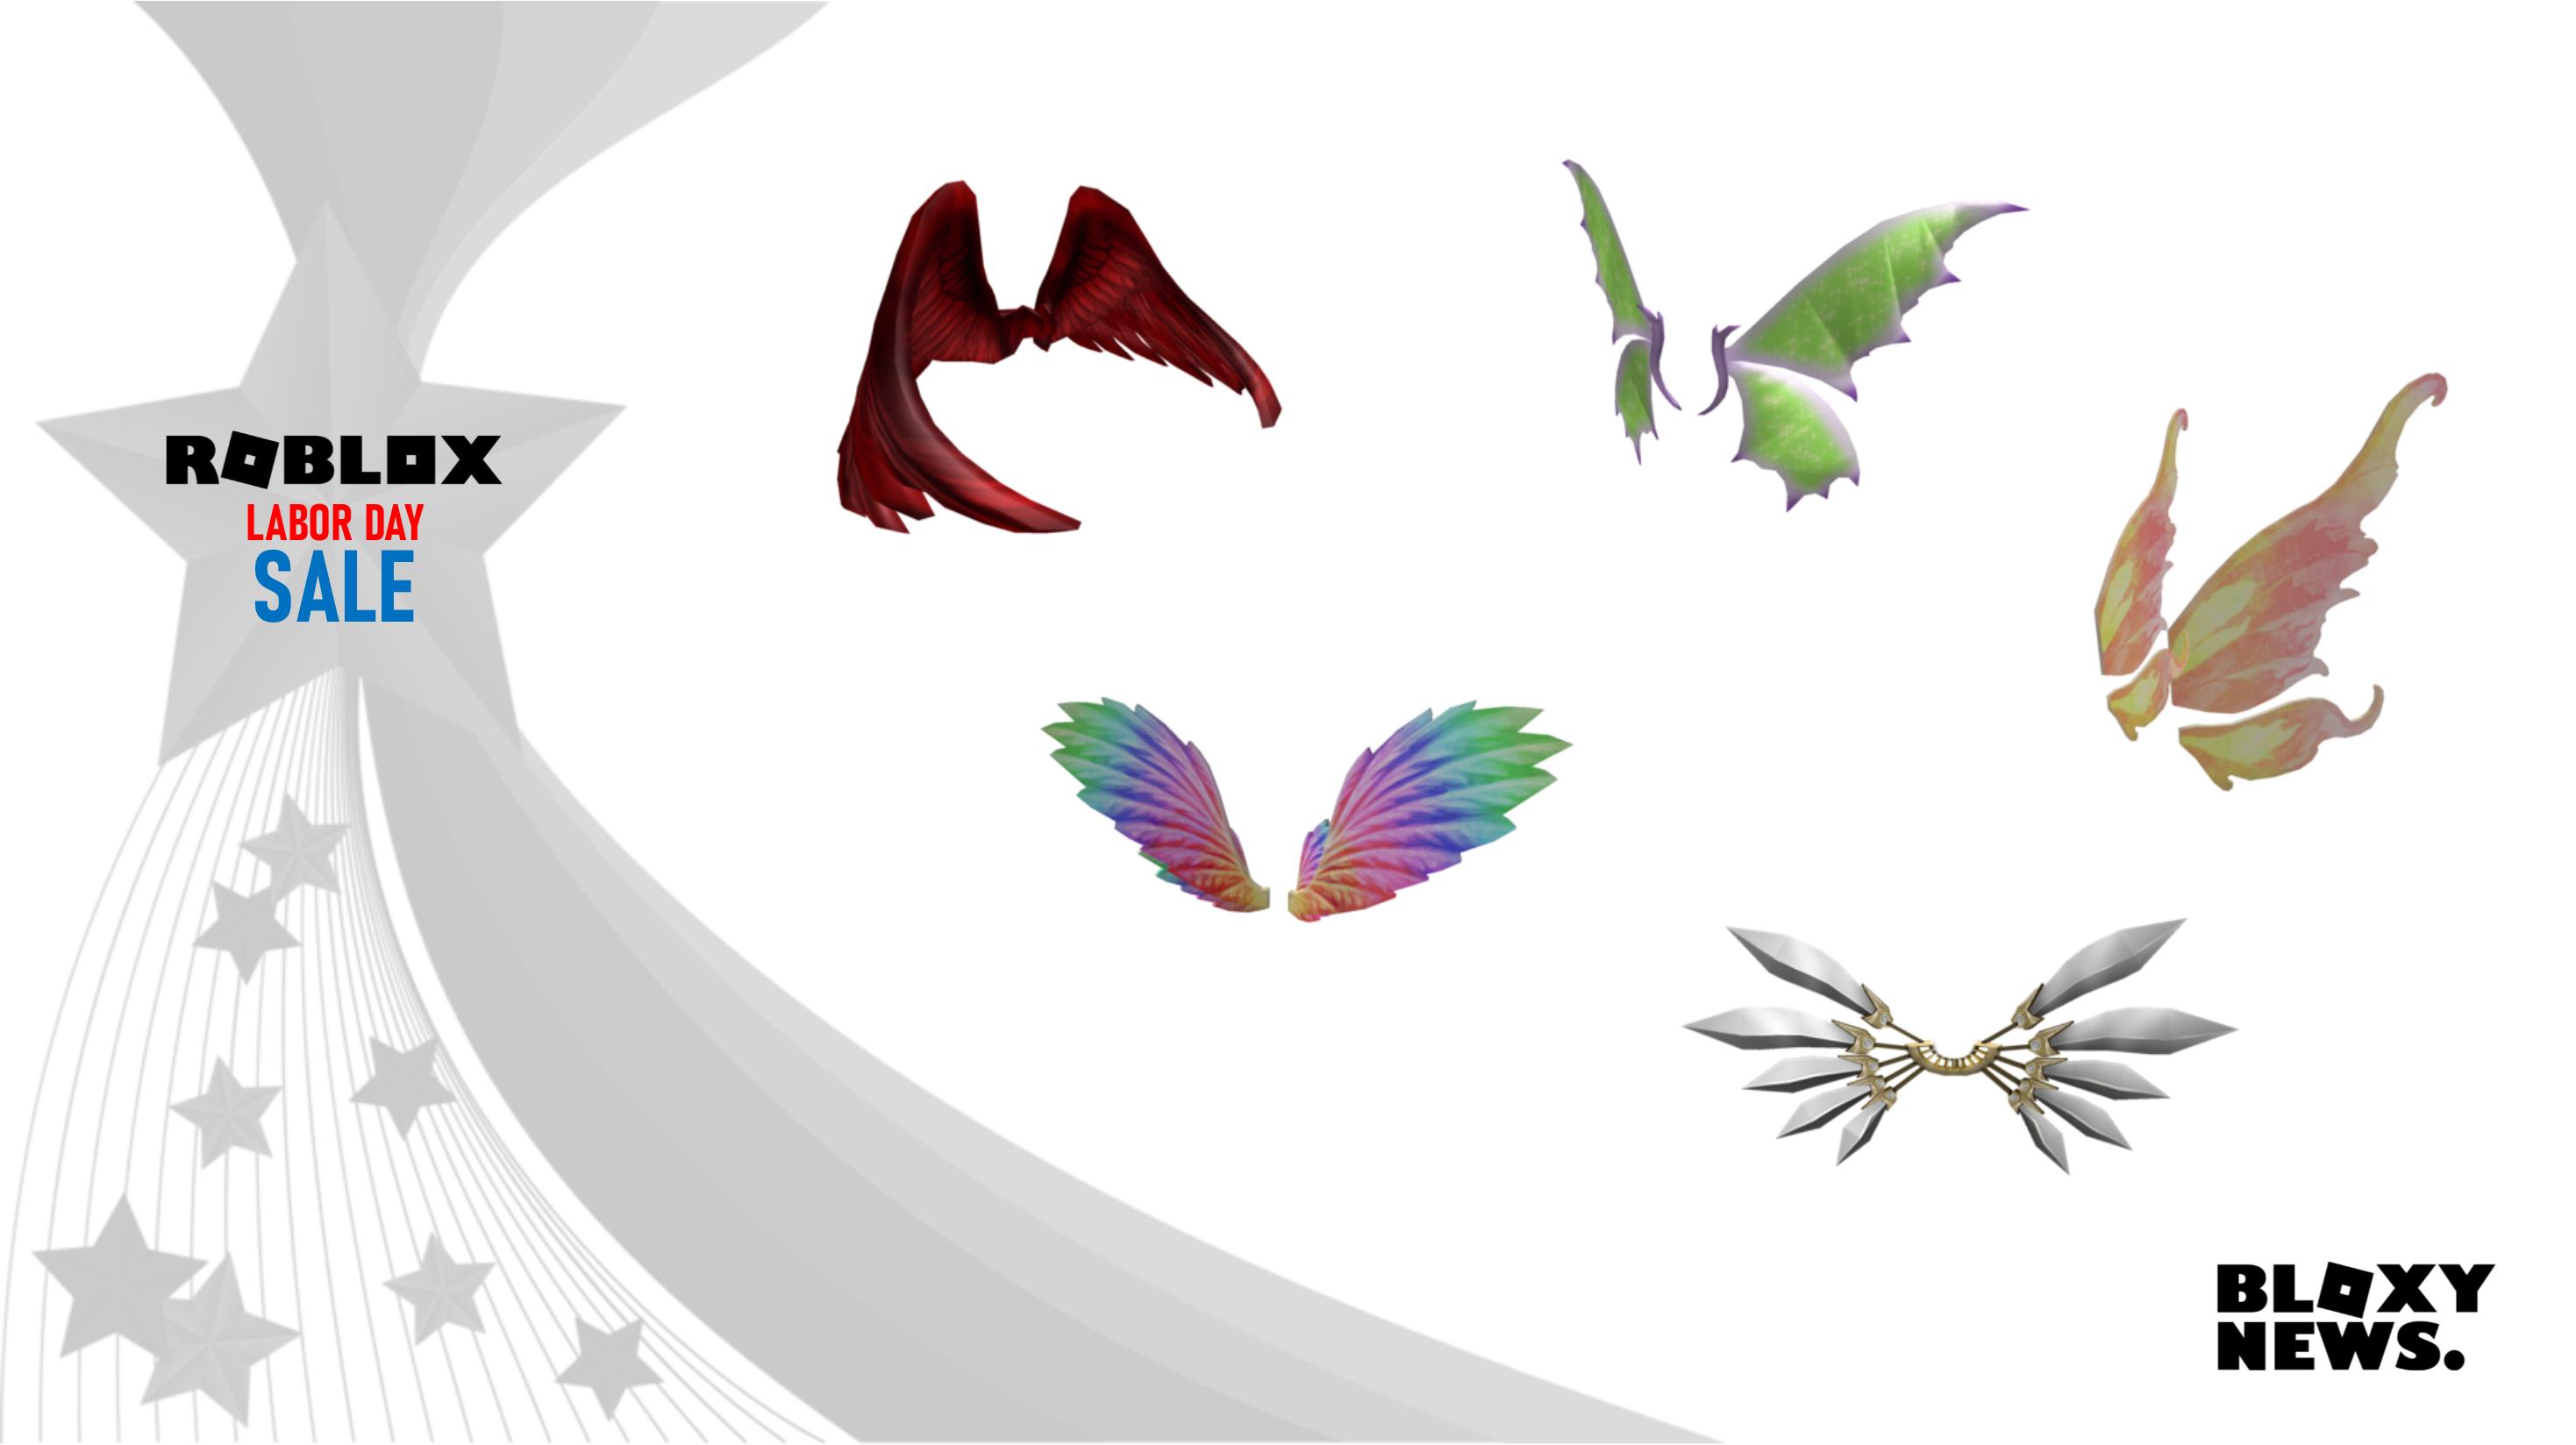 Bloxy News On Twitter It S Time To Fly Get These Sets Of Wings Available At A Discounted Price For The Roblox Labordaysale Links Can Be Found In The Replies Below Https T Co Emlkfdaeoo - cybernetic wings roblox